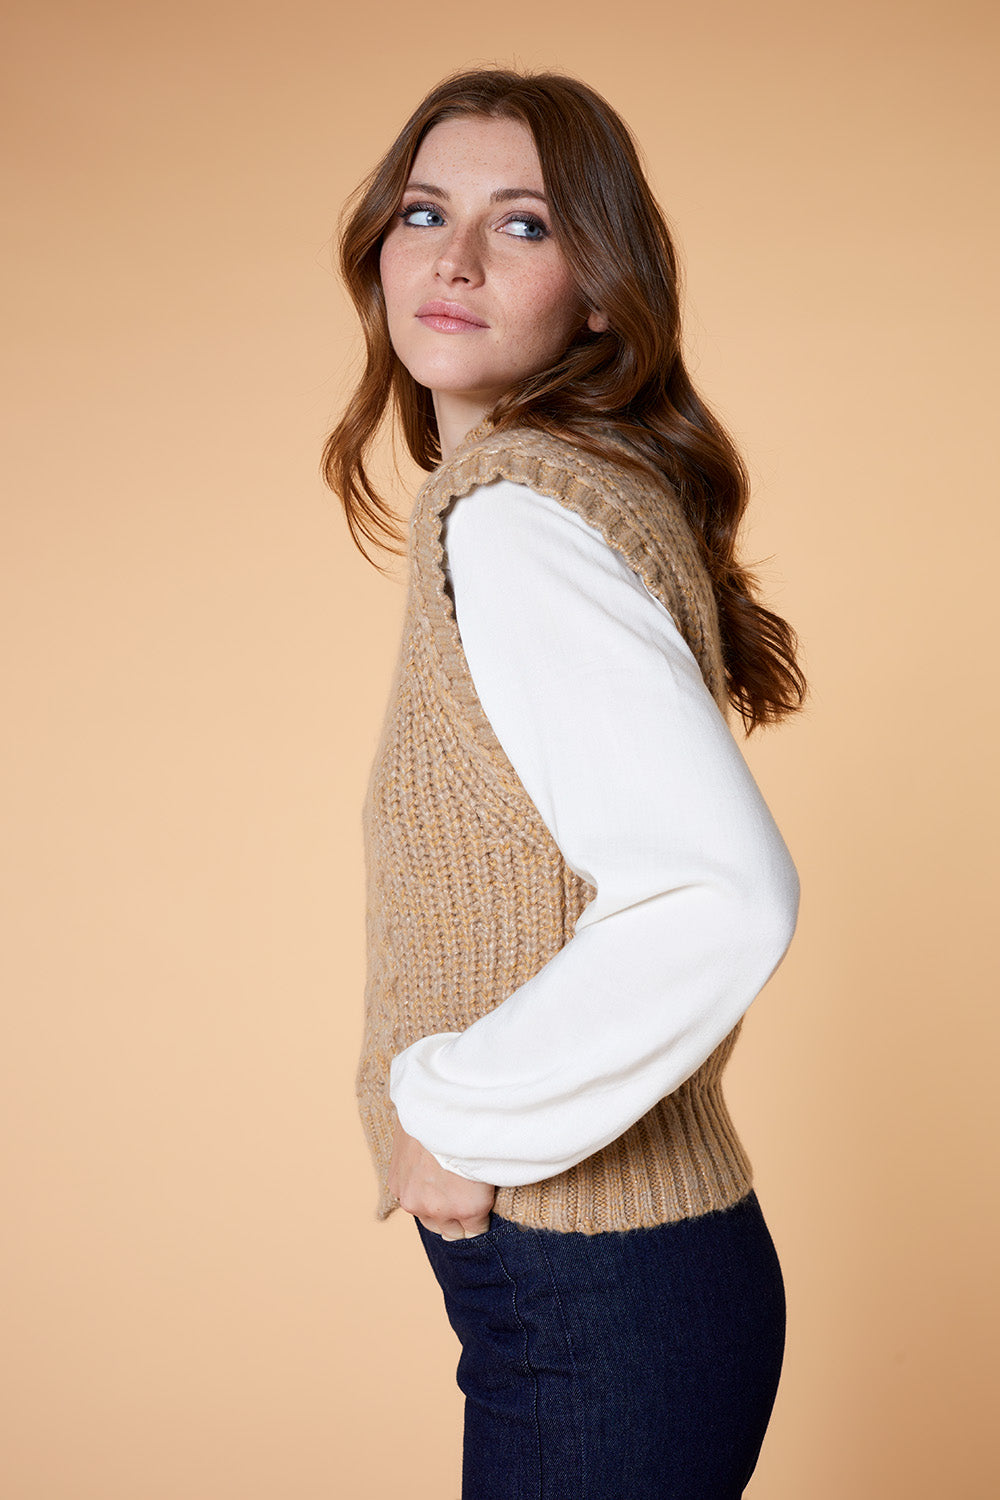 TIMY - Pull light gold en tricot sans manches